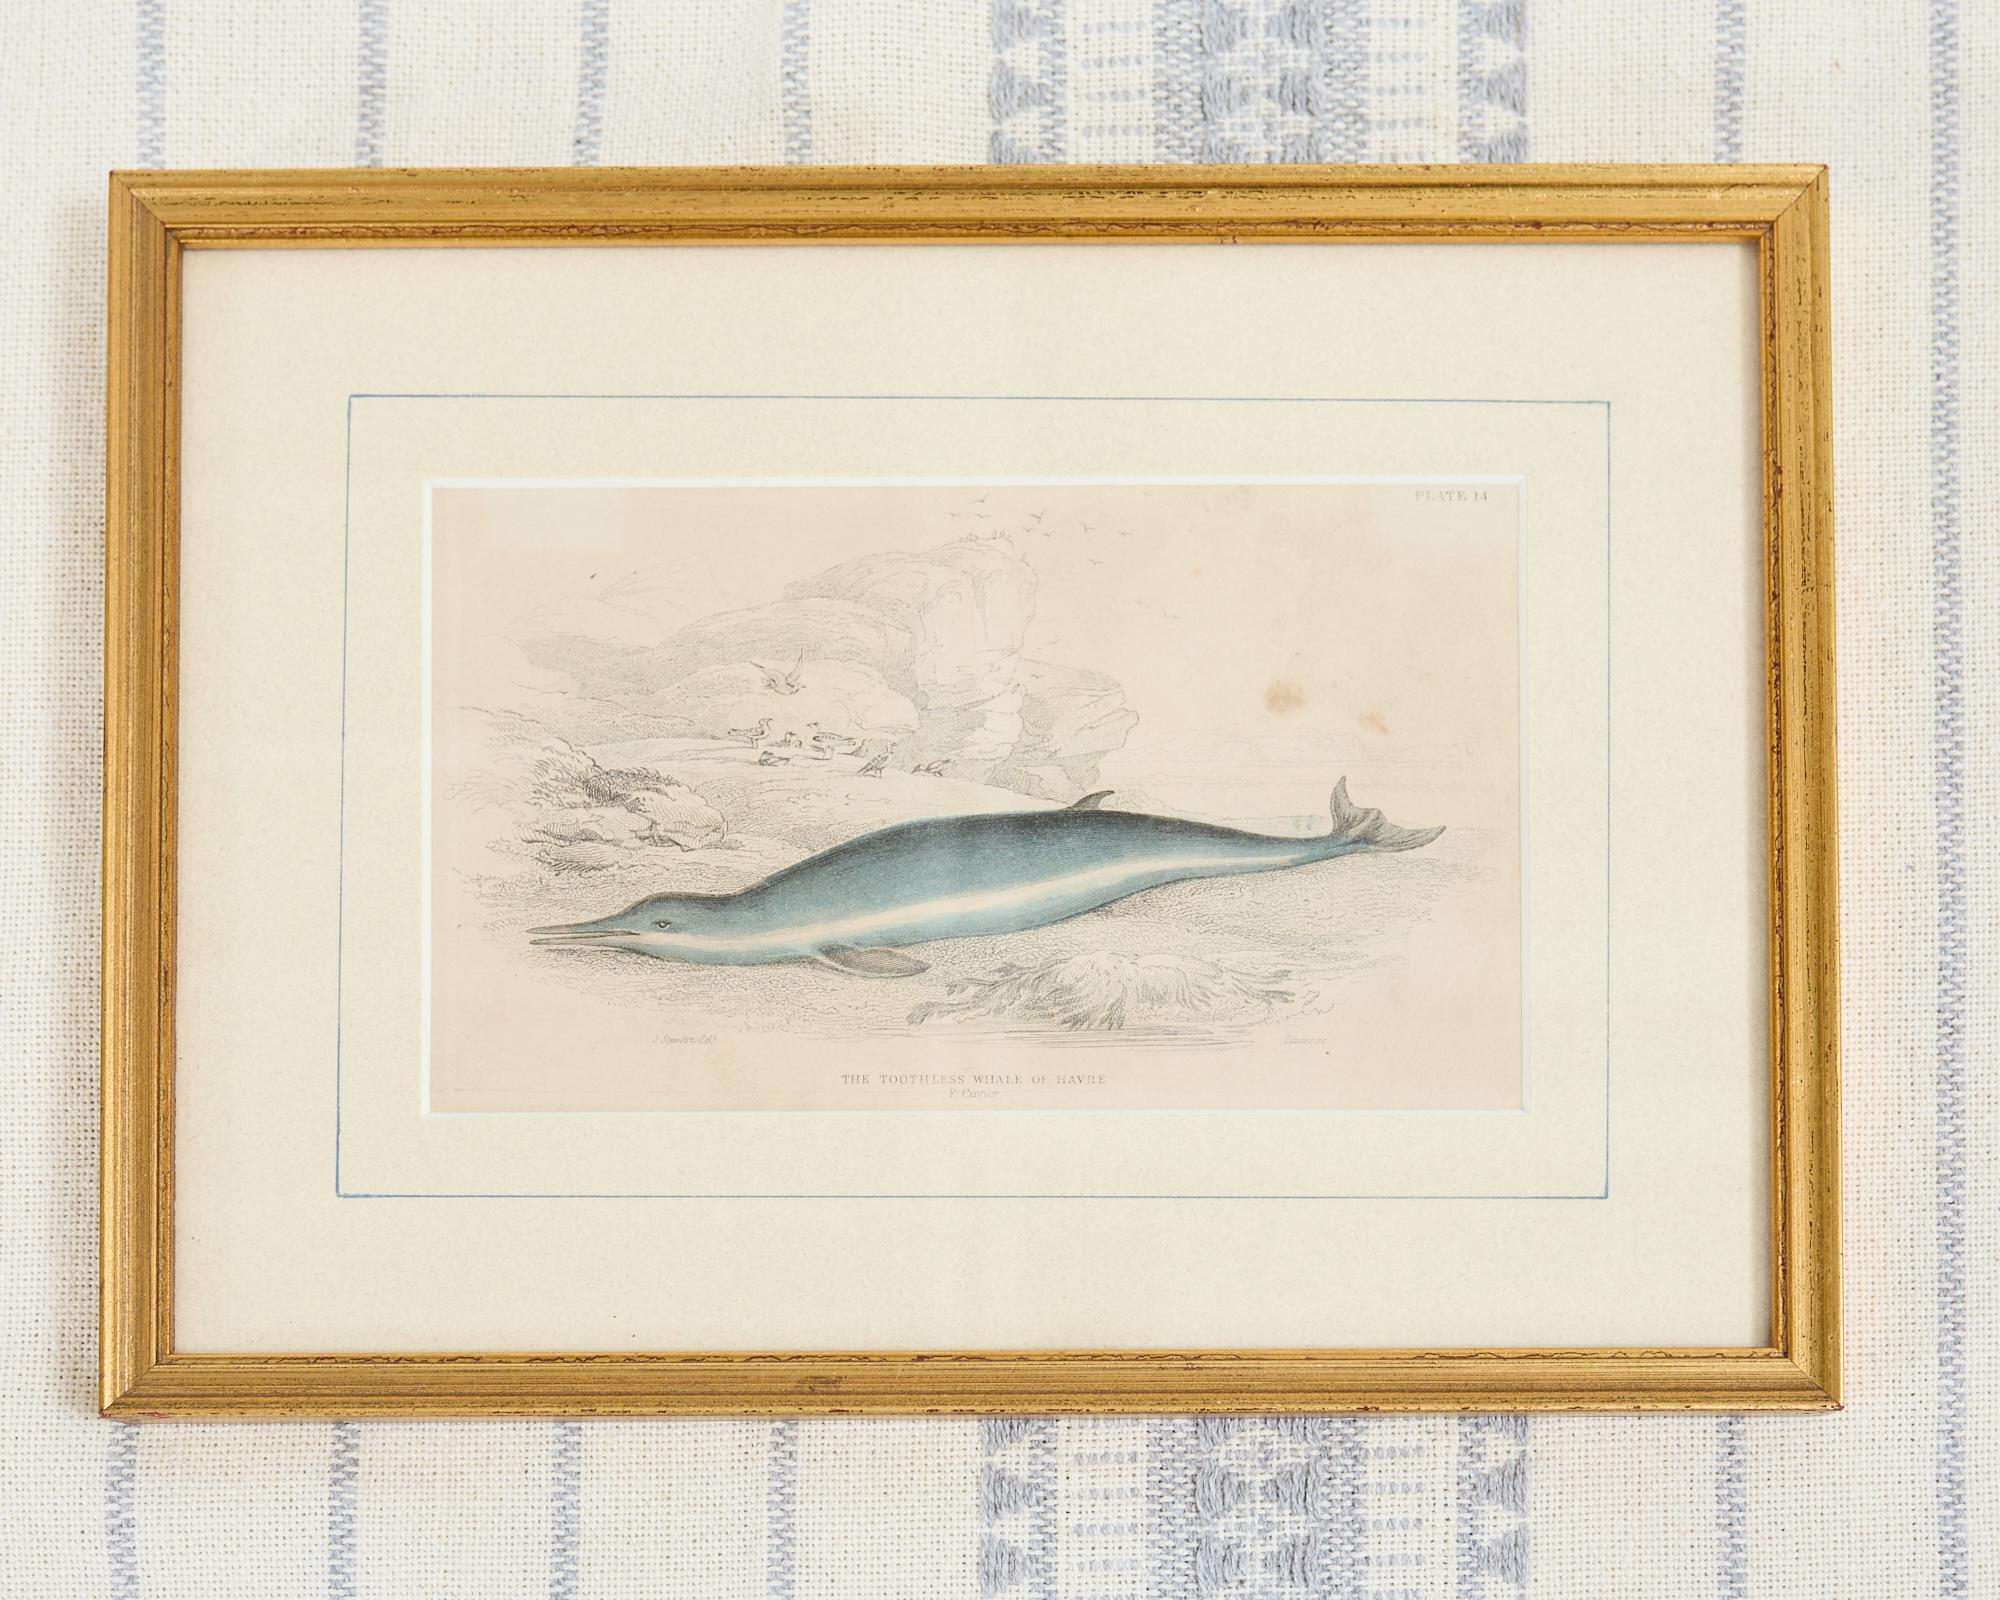 Set of Six 19th Century Hand-Colored Marine Biology Prints For Sale 2